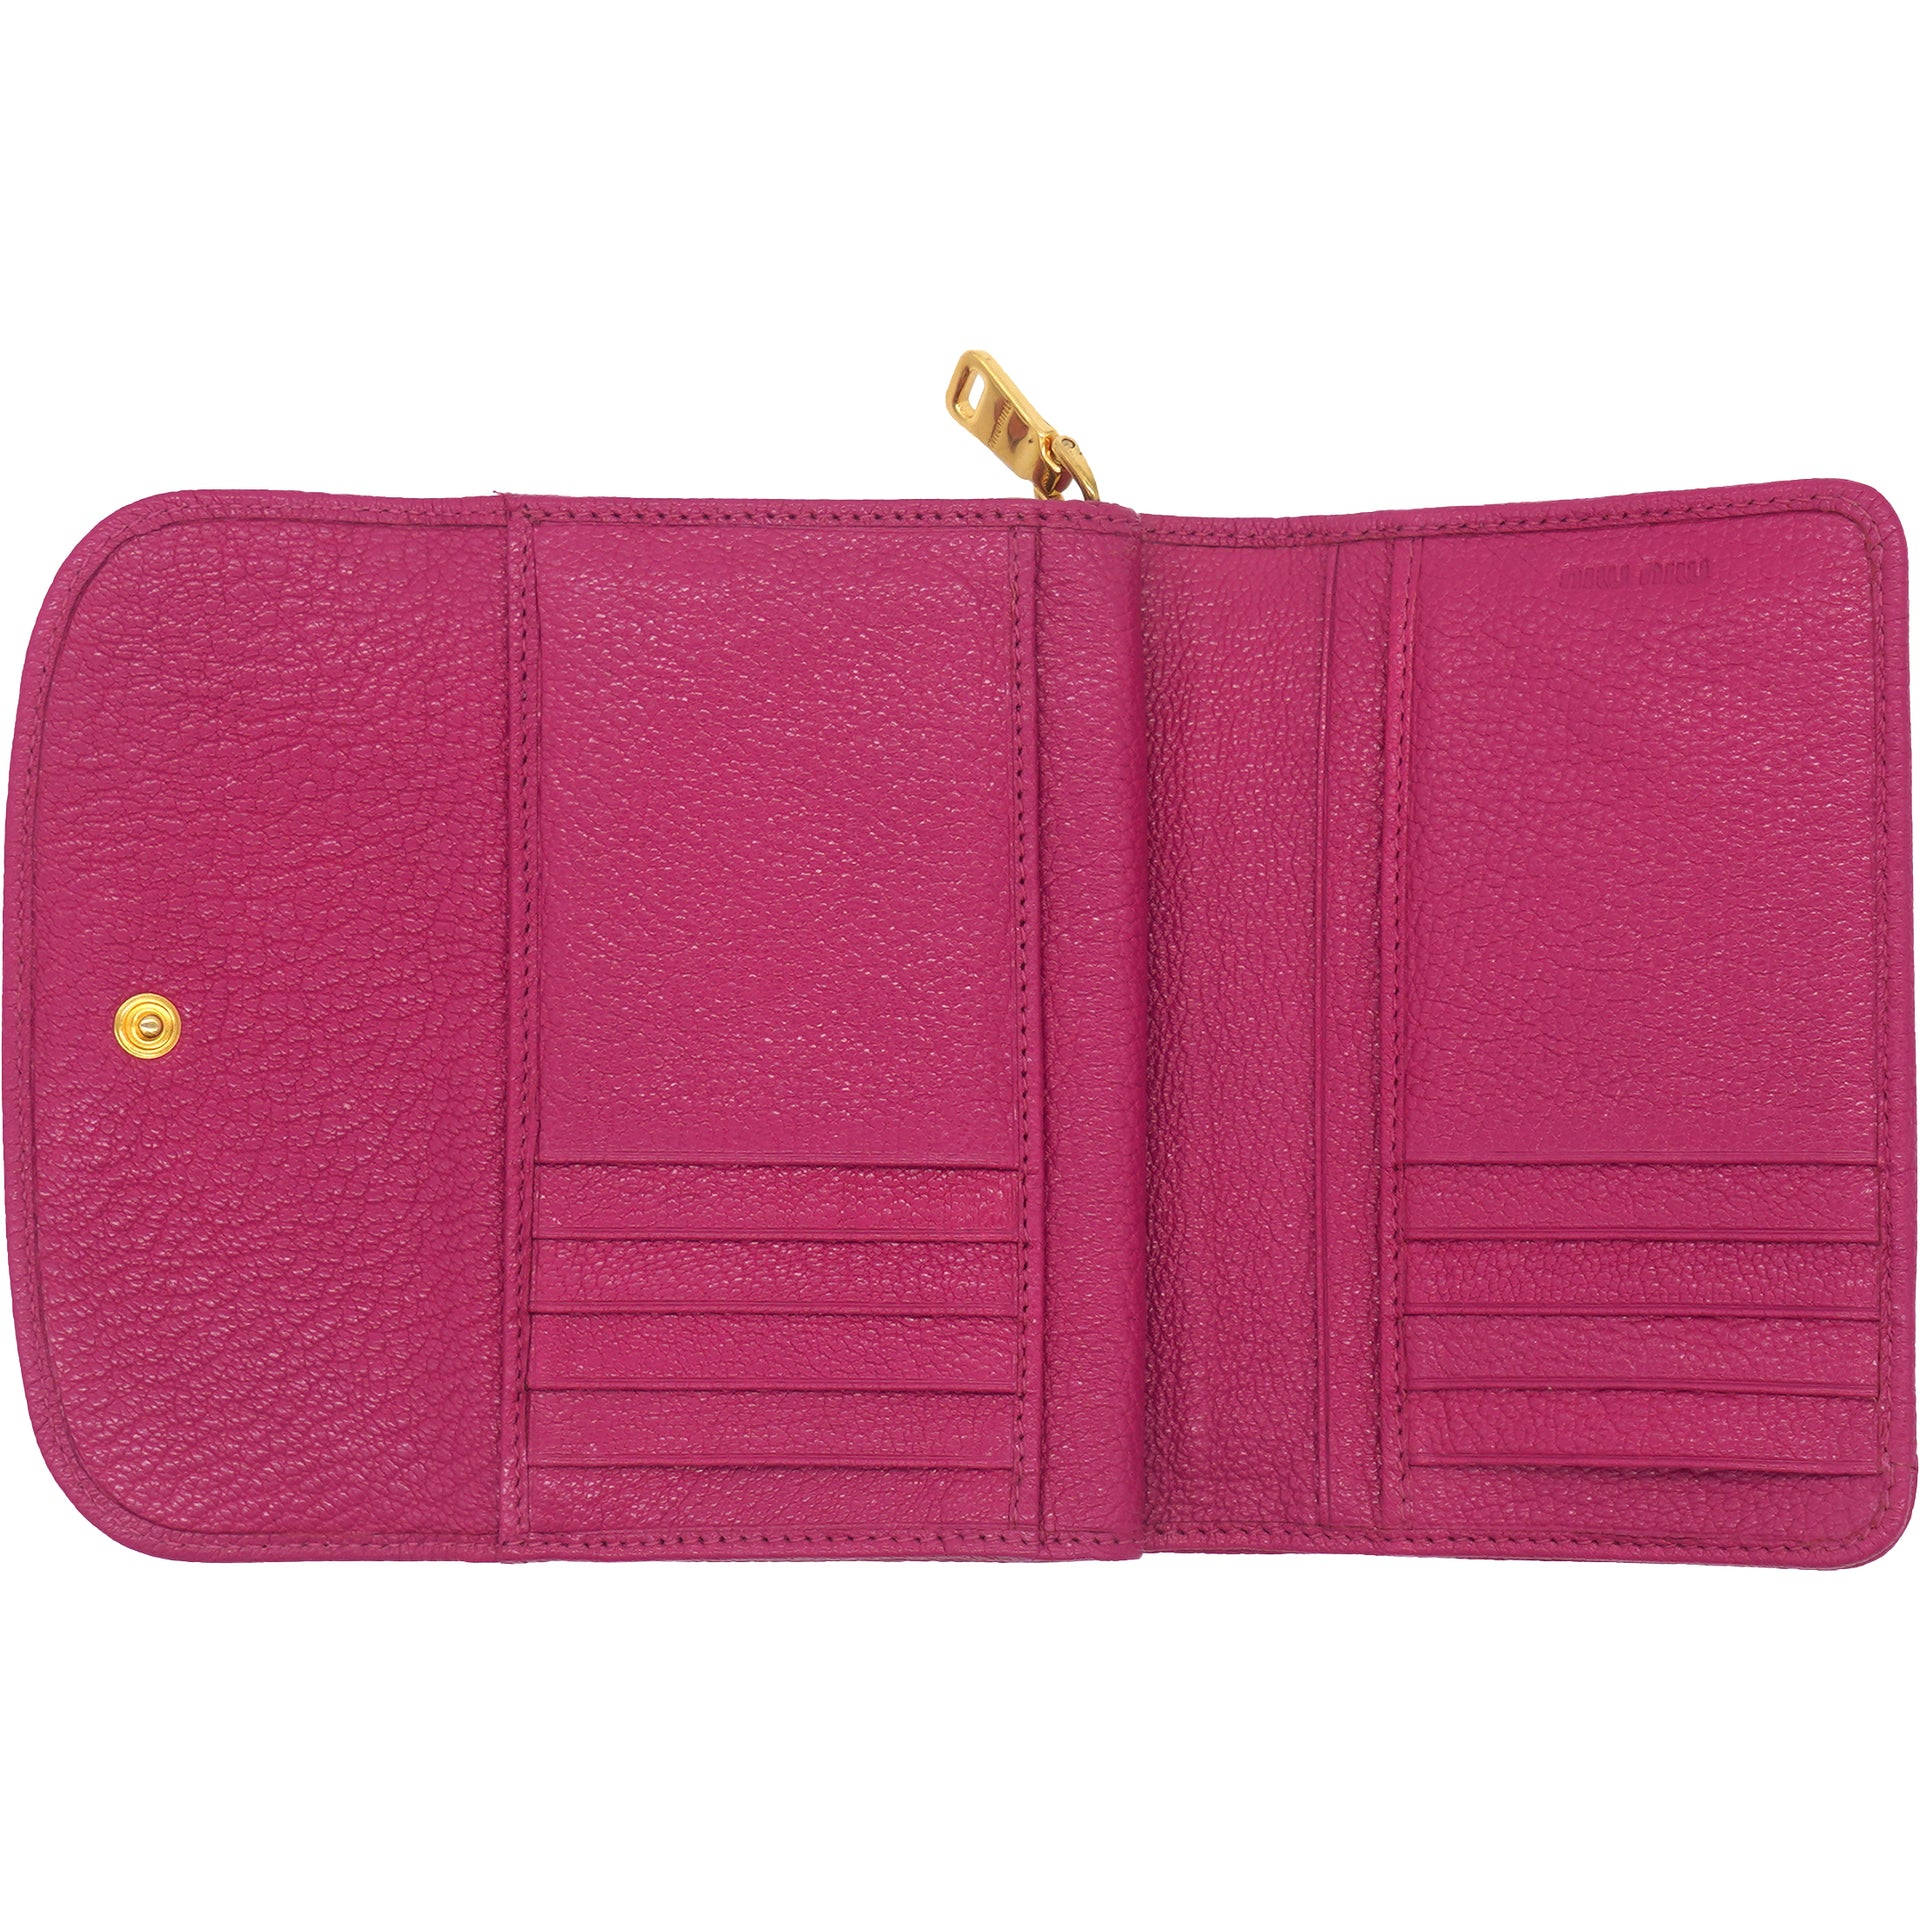 Double Sided purse Tri-fold wallet leather Pink Used Women logo